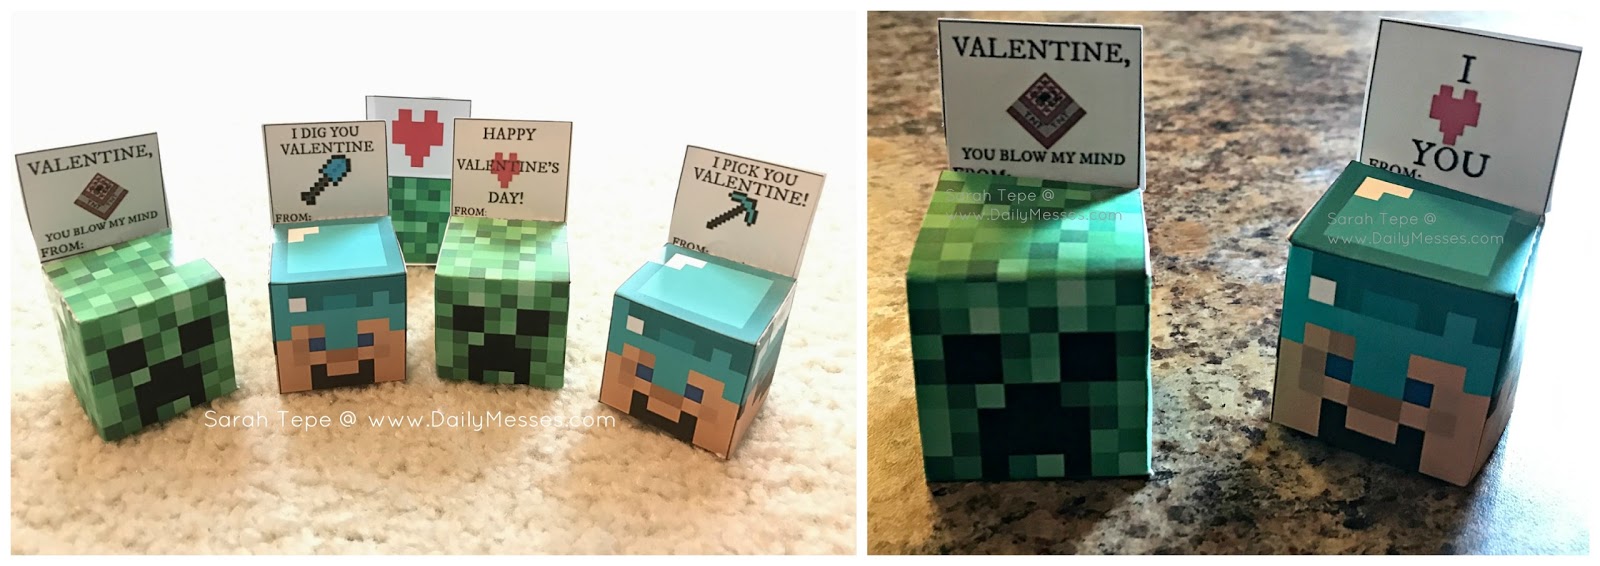 Video Games Global Valentine S Day Traditions